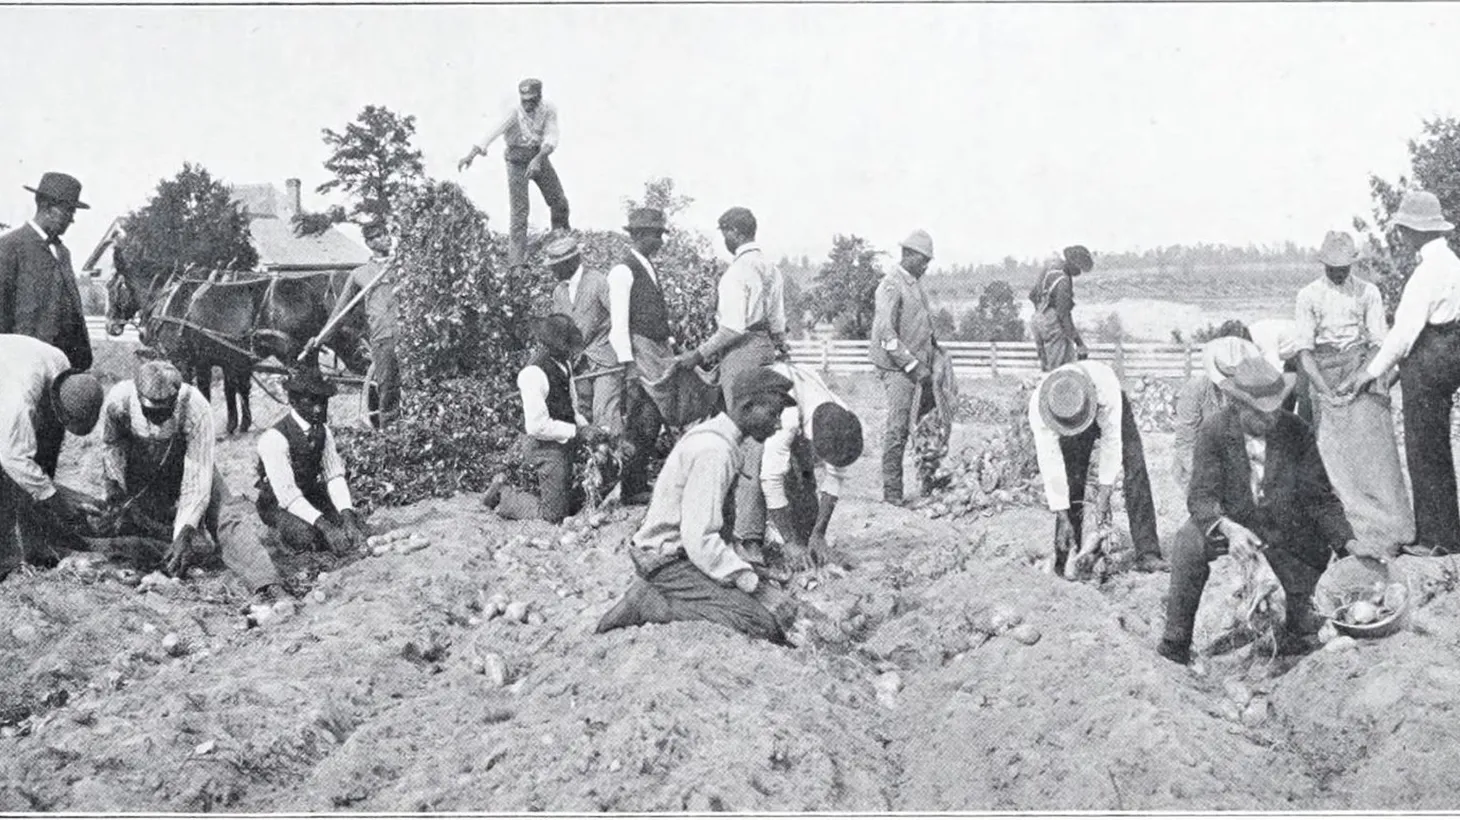 Students from the Tuskegee Institute work on a farm at the school, 1910.